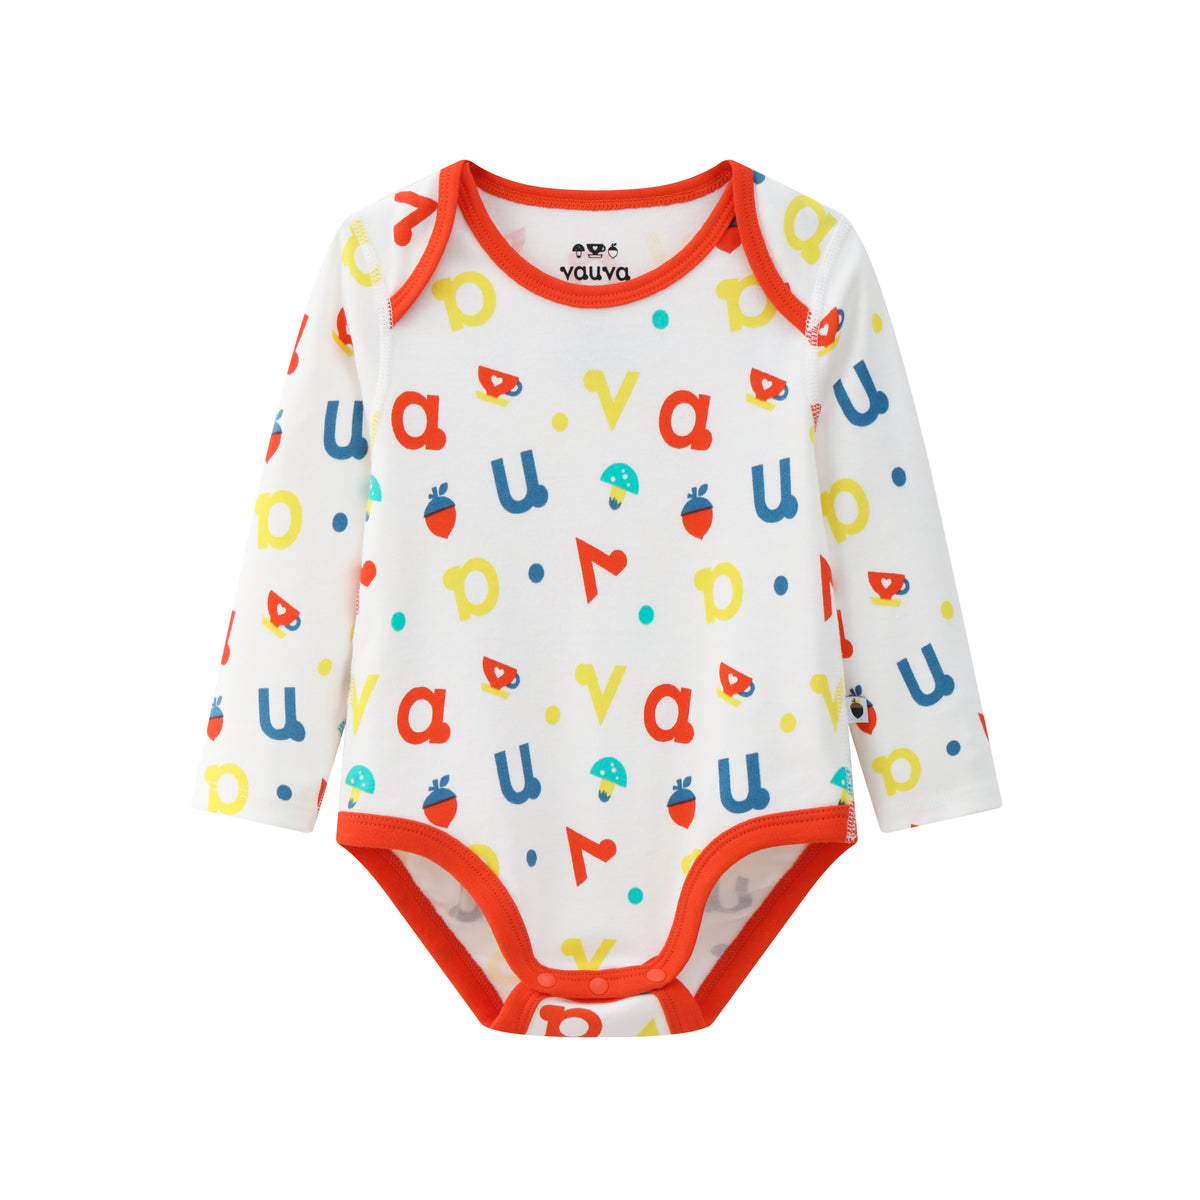 Vauva BBNS - Baby Organic Cotton Printed Bodysuits (2-Pack) product image front -02